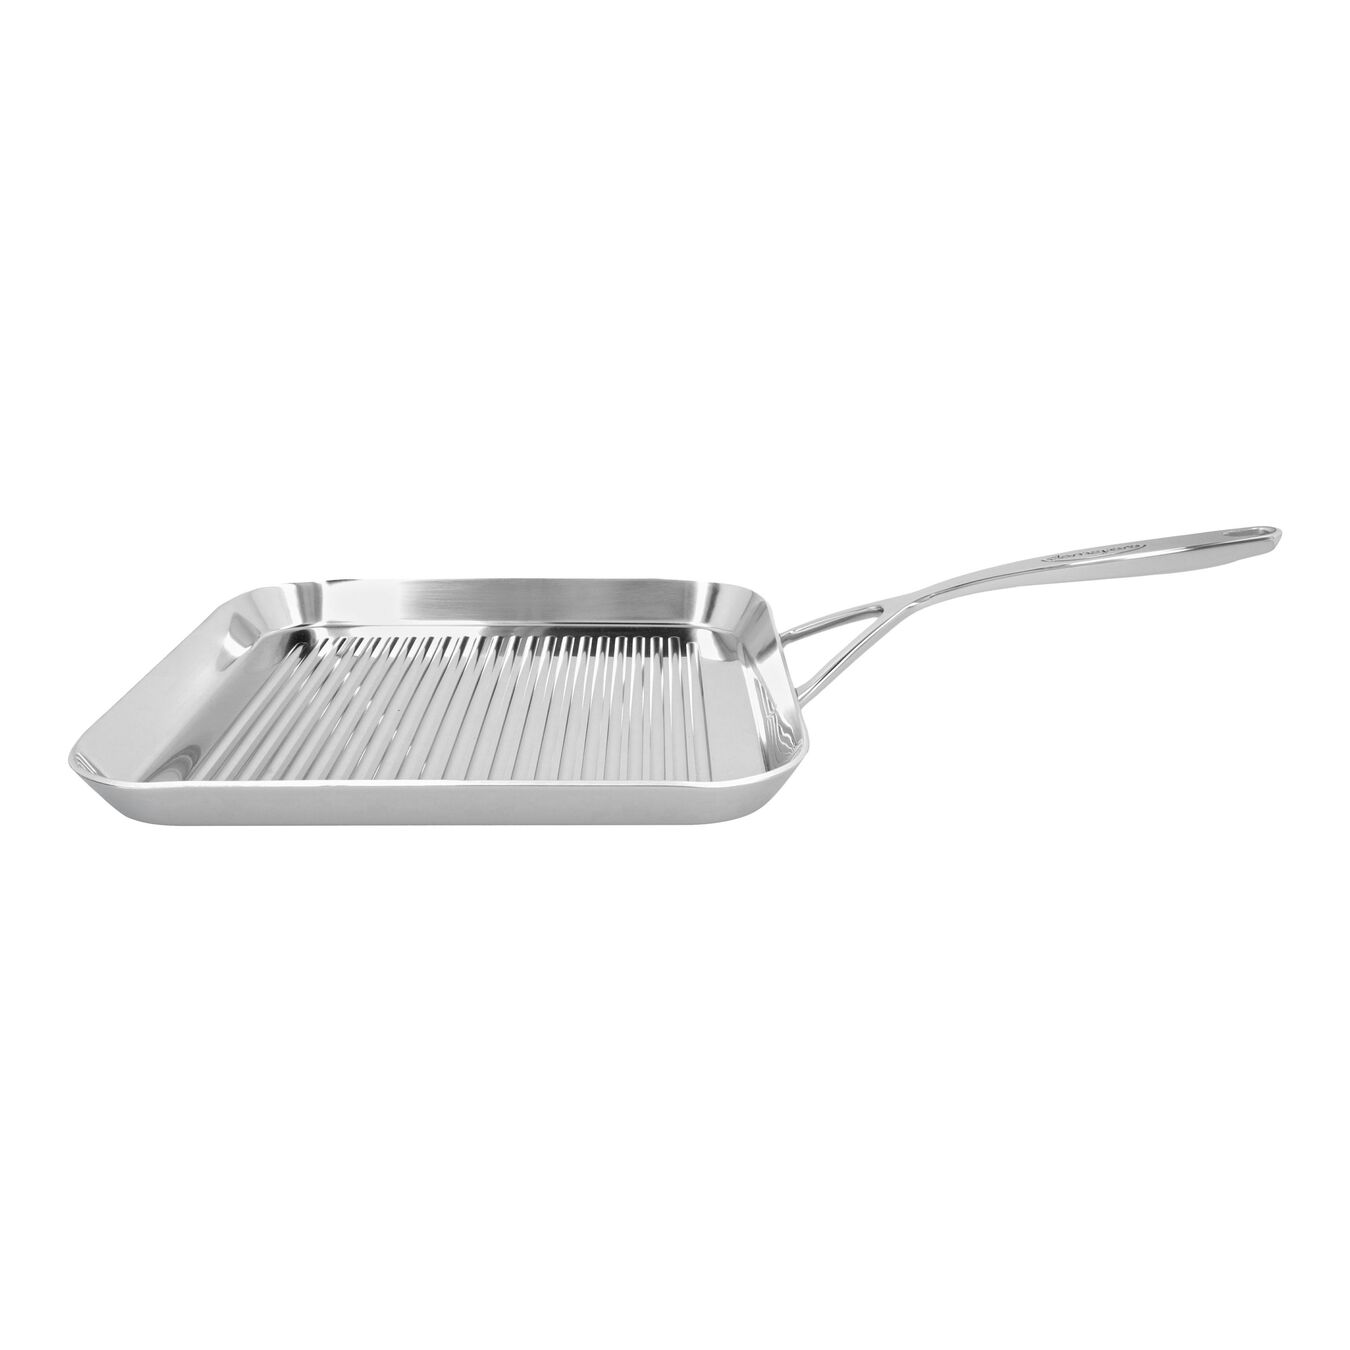 28 x 28 cm square 18/10 Stainless Steel Grill pan silver,,large 1